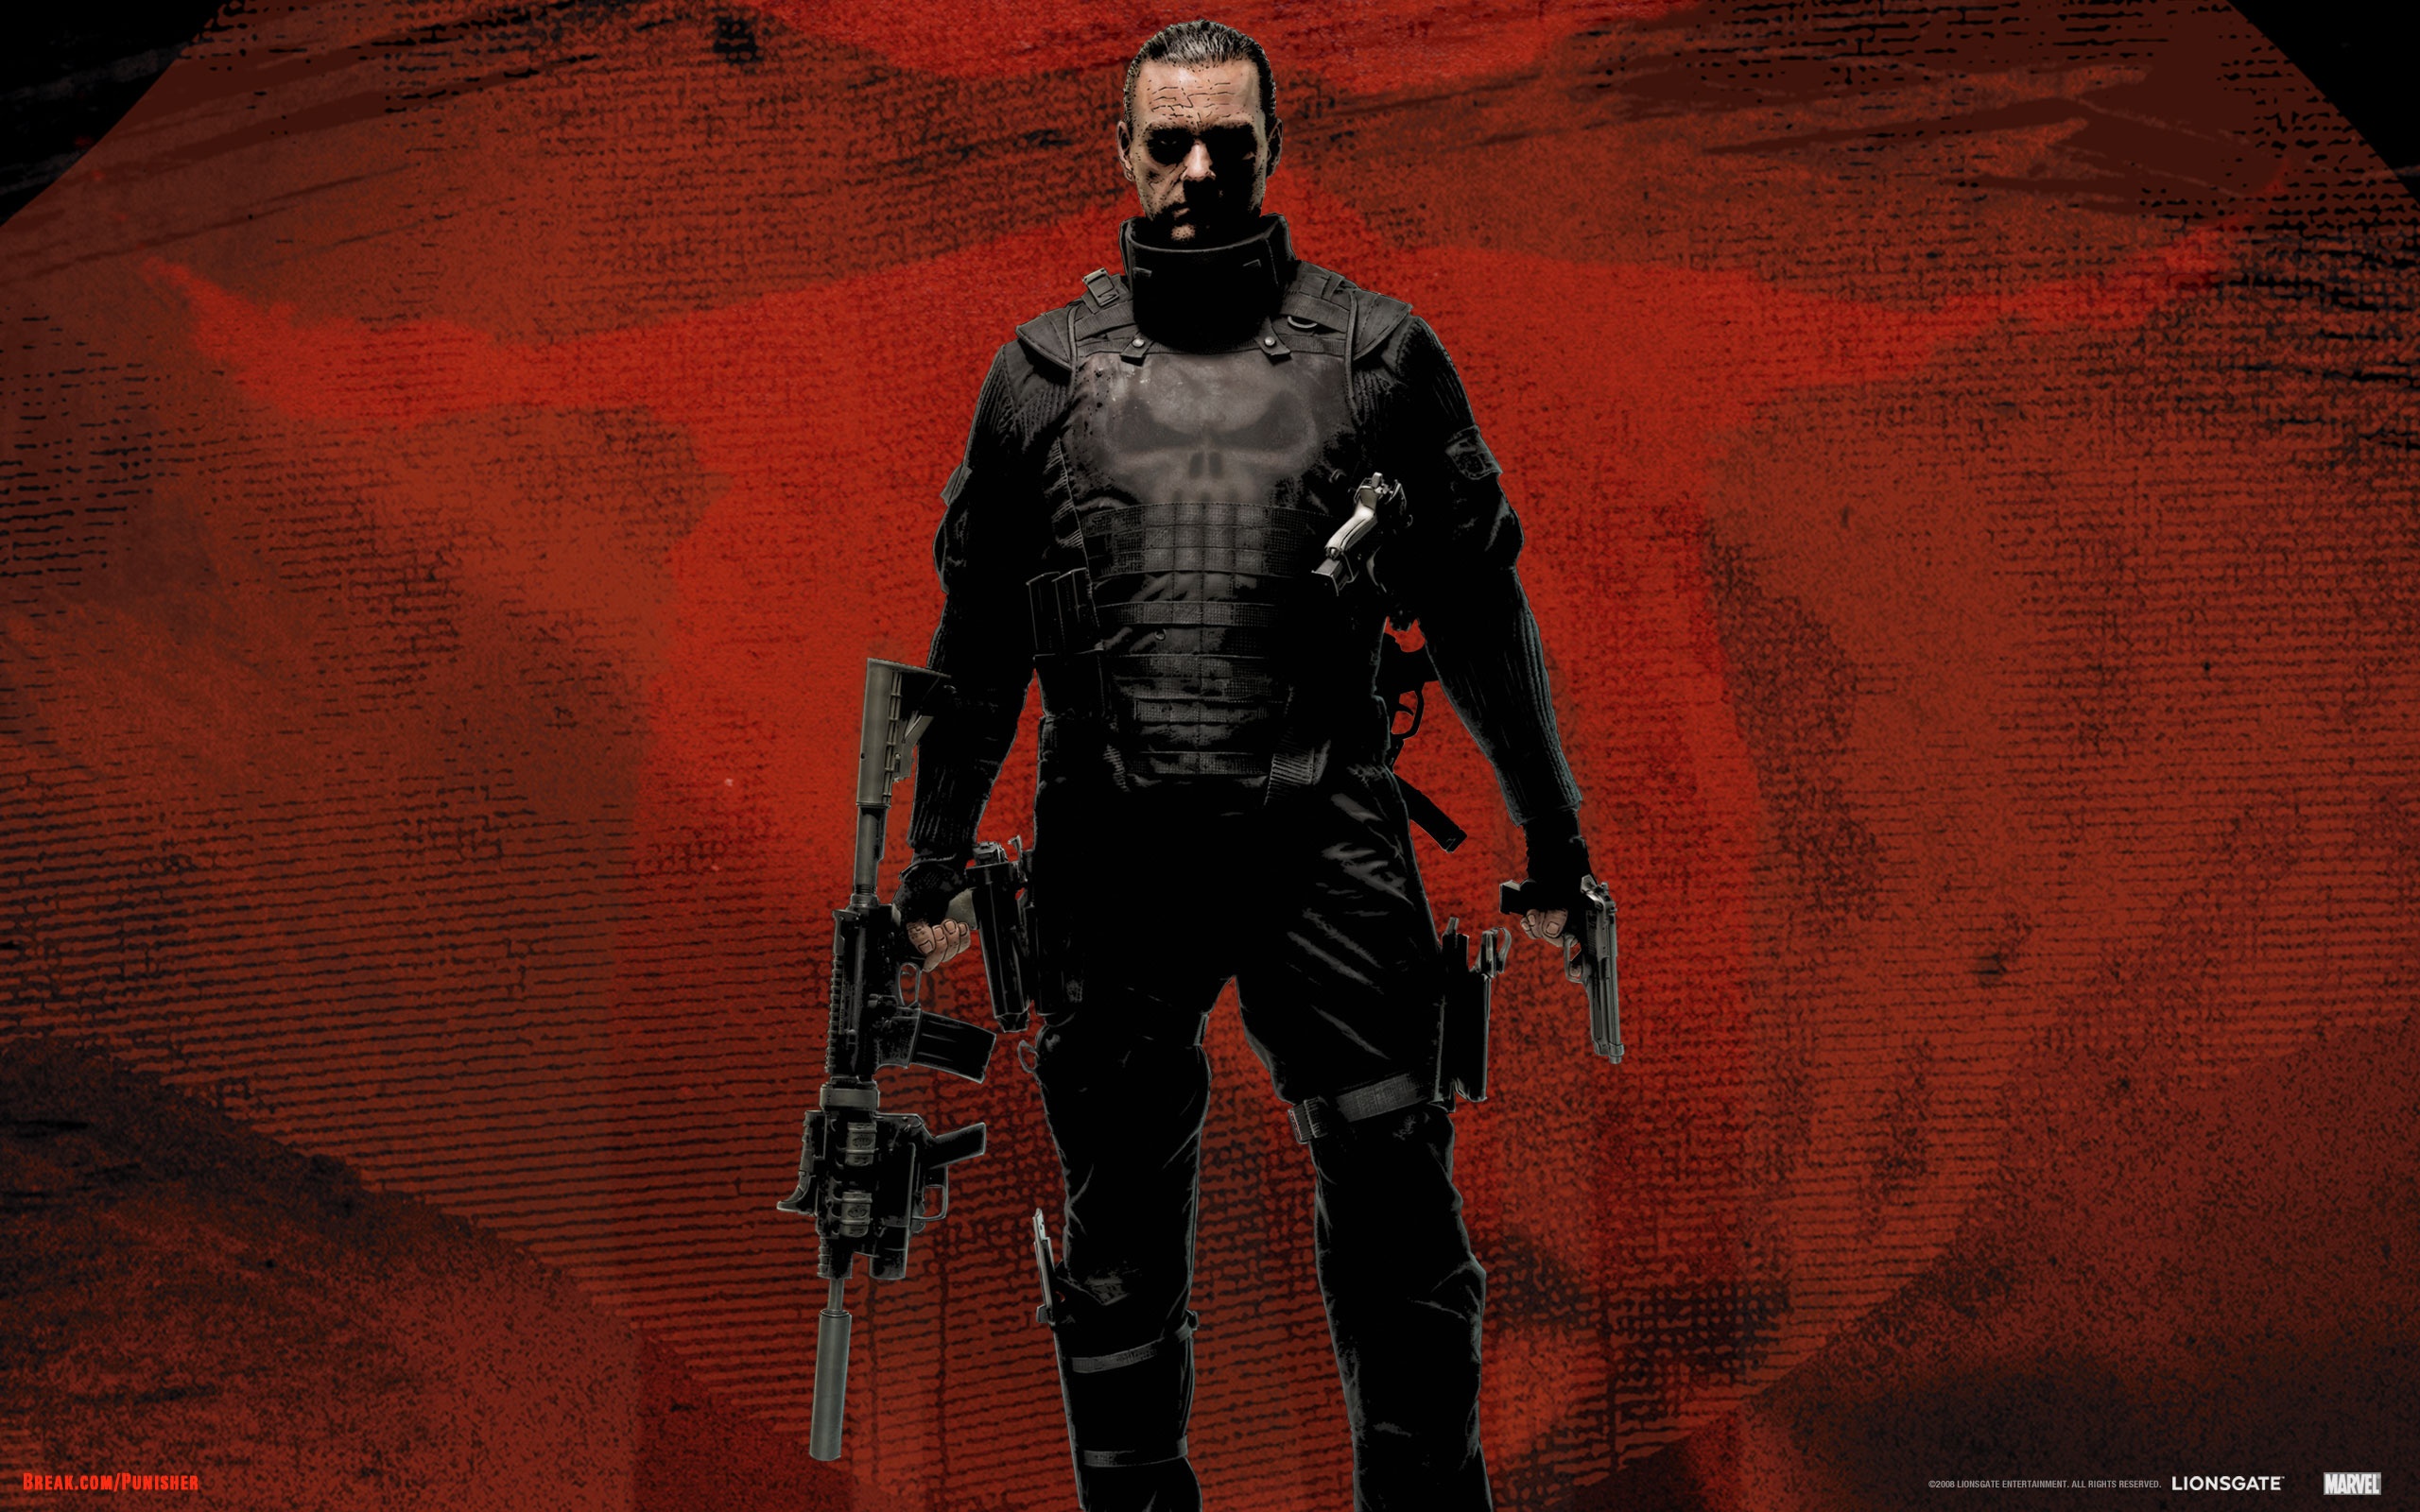 Download Punisher: War Zone wallpapers for mobile phone, free